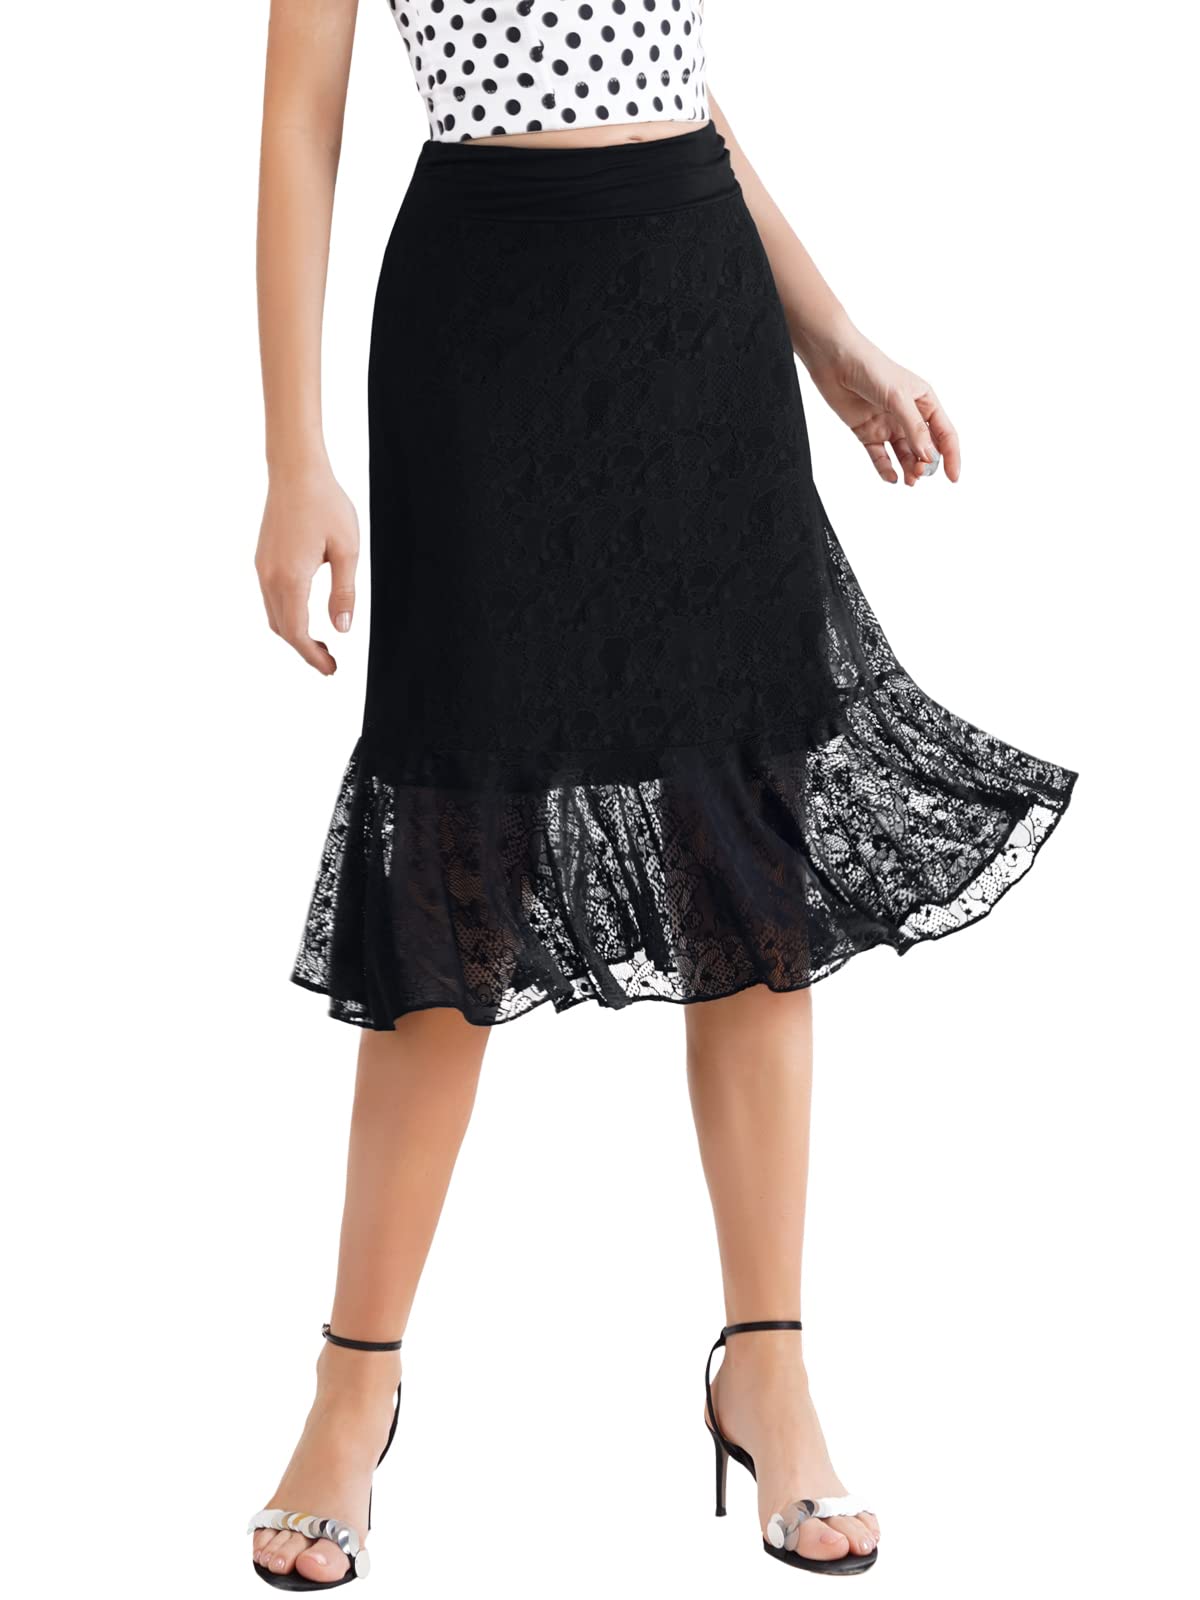 BAISHENGGT Solid Black Womens Summer High Waisted Ruched Mesh Skirt Floral Layers Ruffled Hem Flowy Swing Midi Skirts